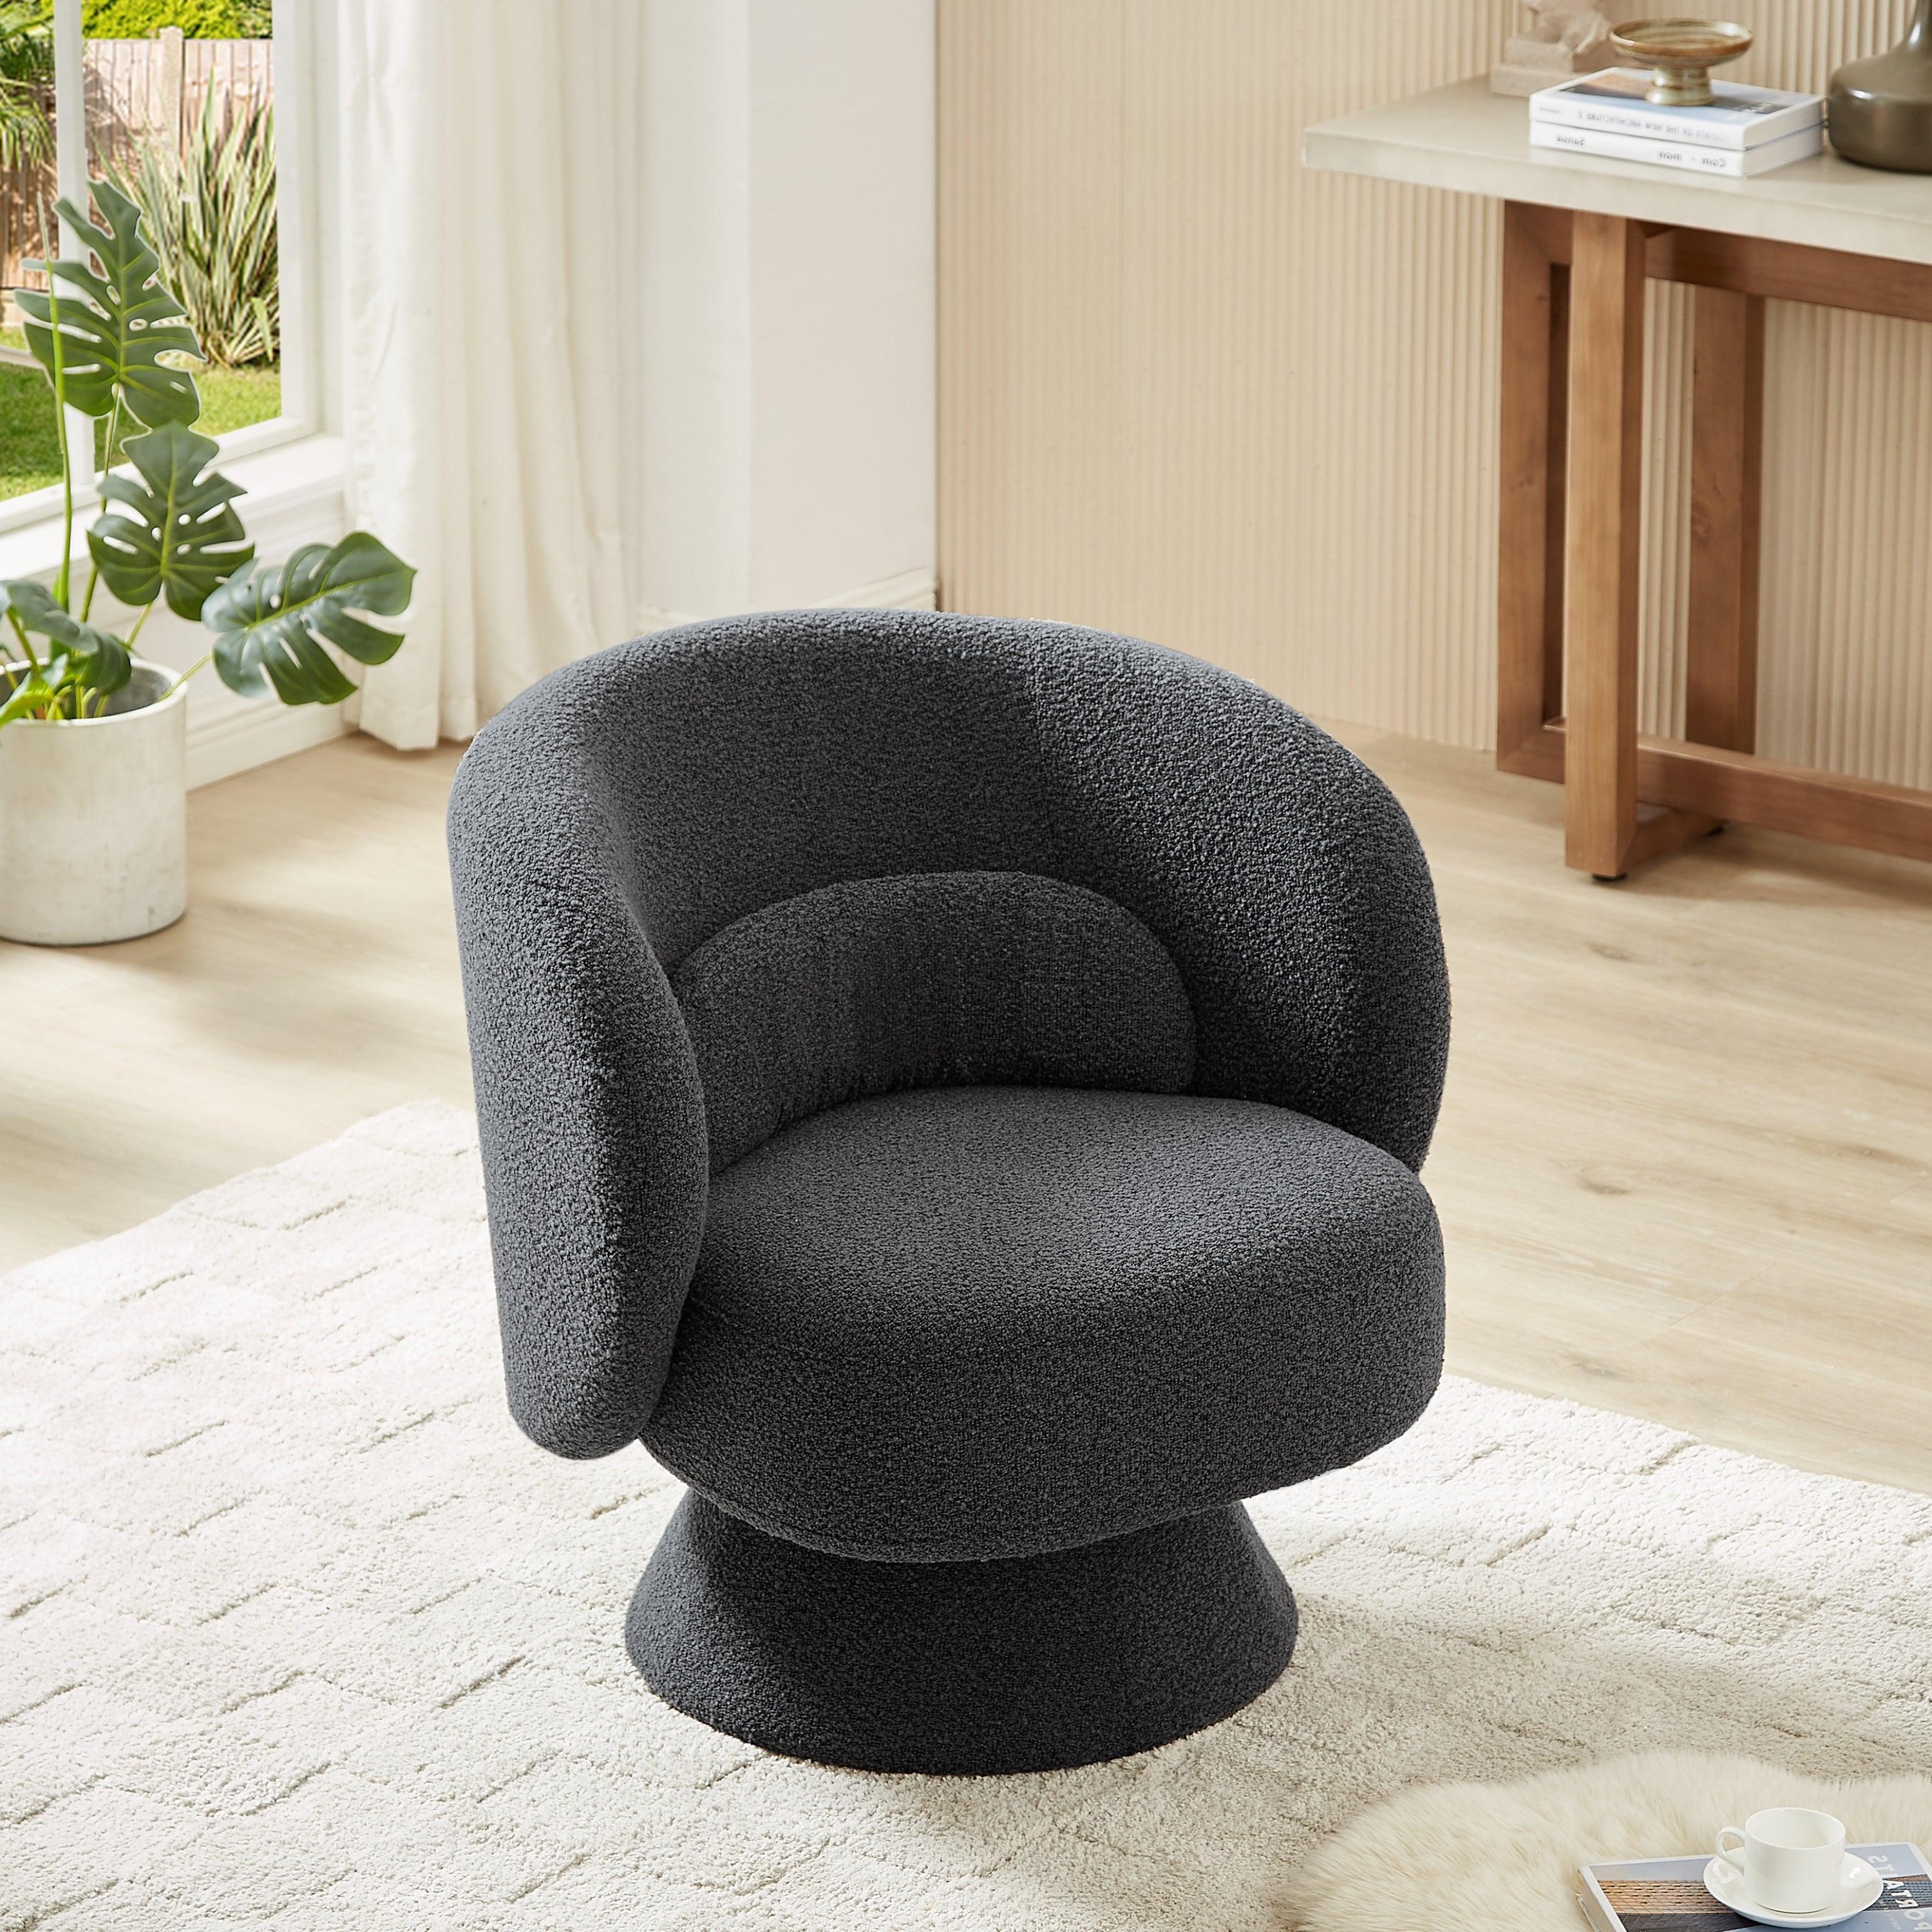 🆓🚛 360 Degree Swivel Sherpa Accent Chair Modern Style Barrel Chair With Toss Pillows for Home Office, Living Room, Bedroom, Dark Gray